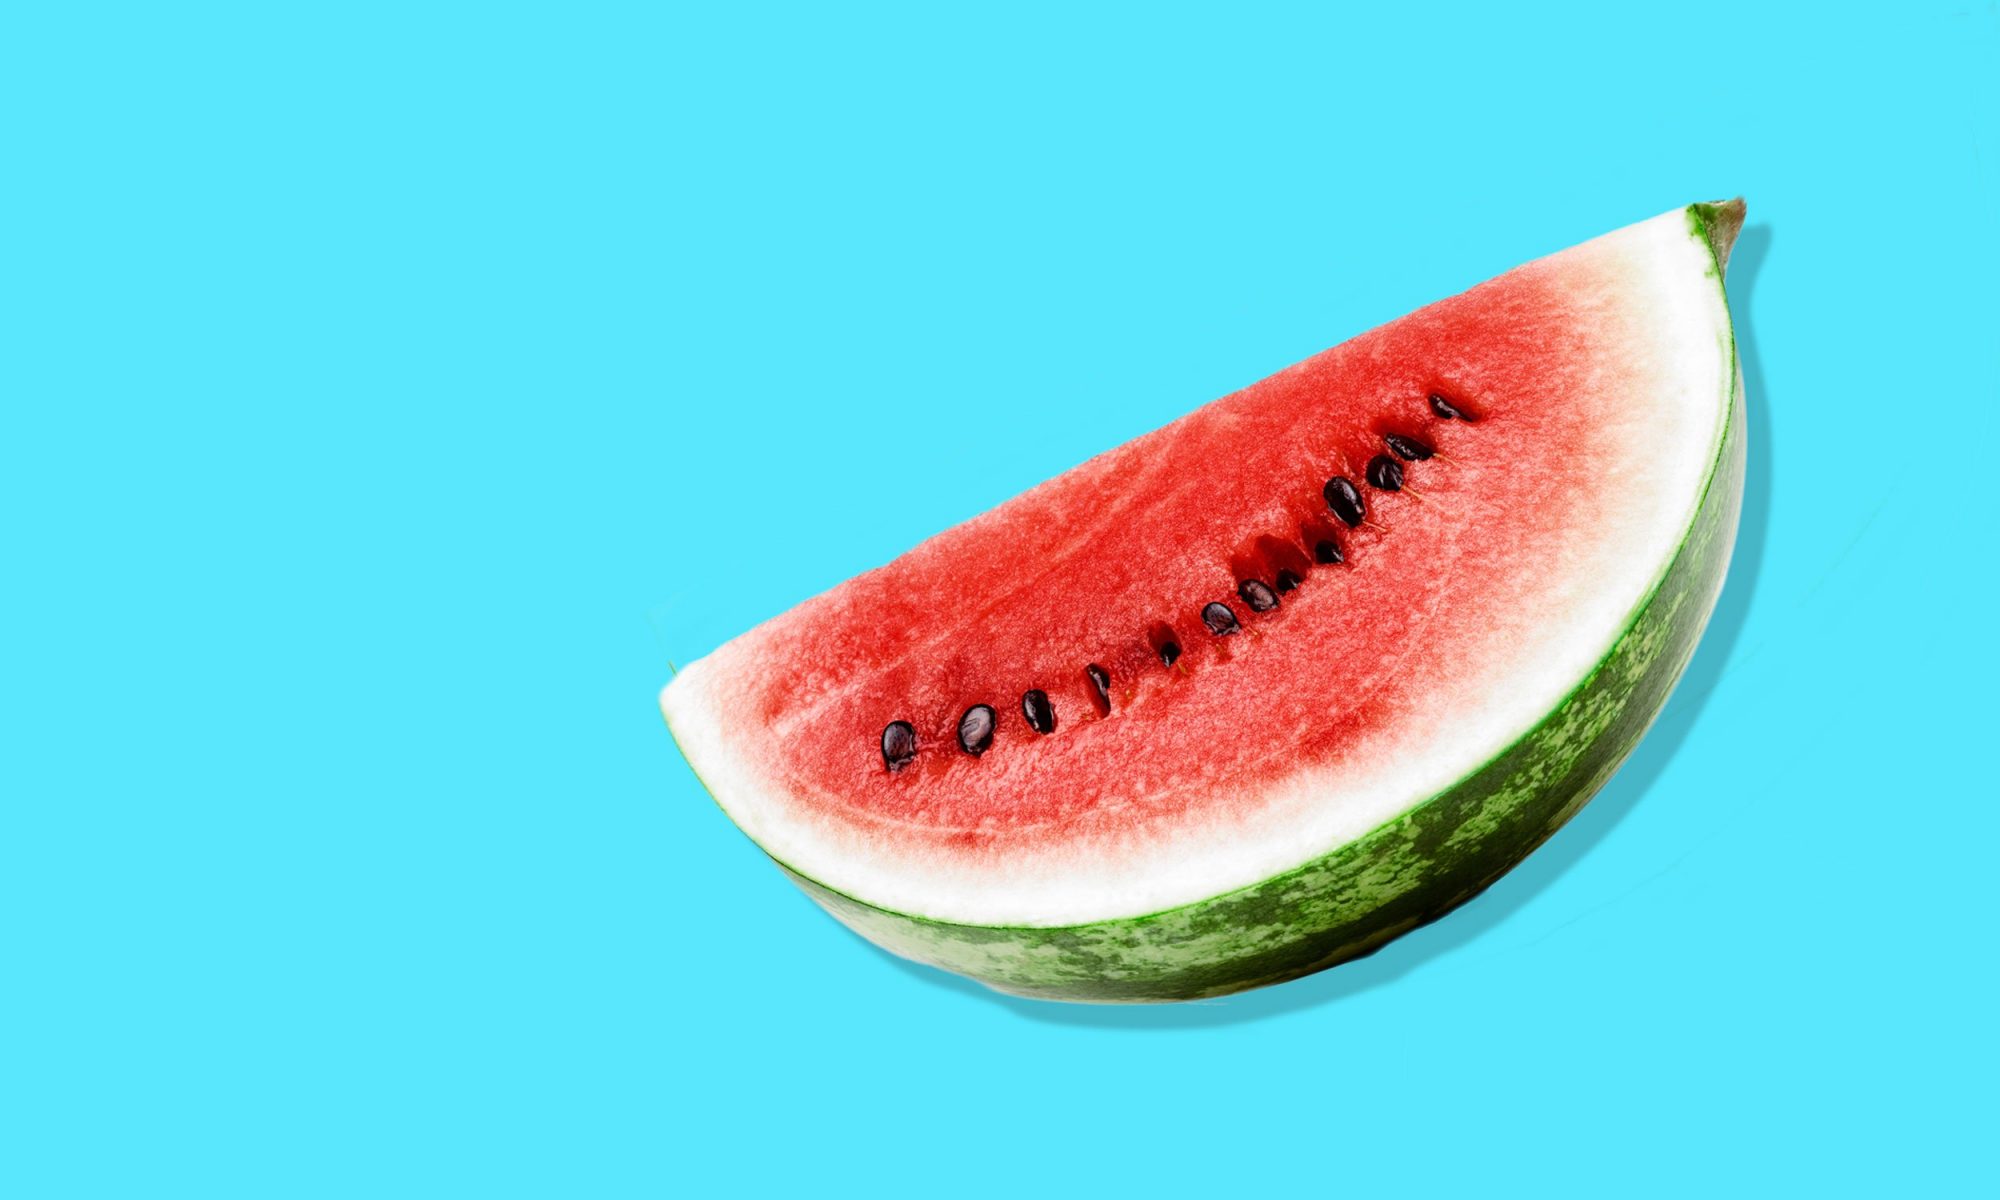 EC: How to Tell If Watermelon Is Ripe